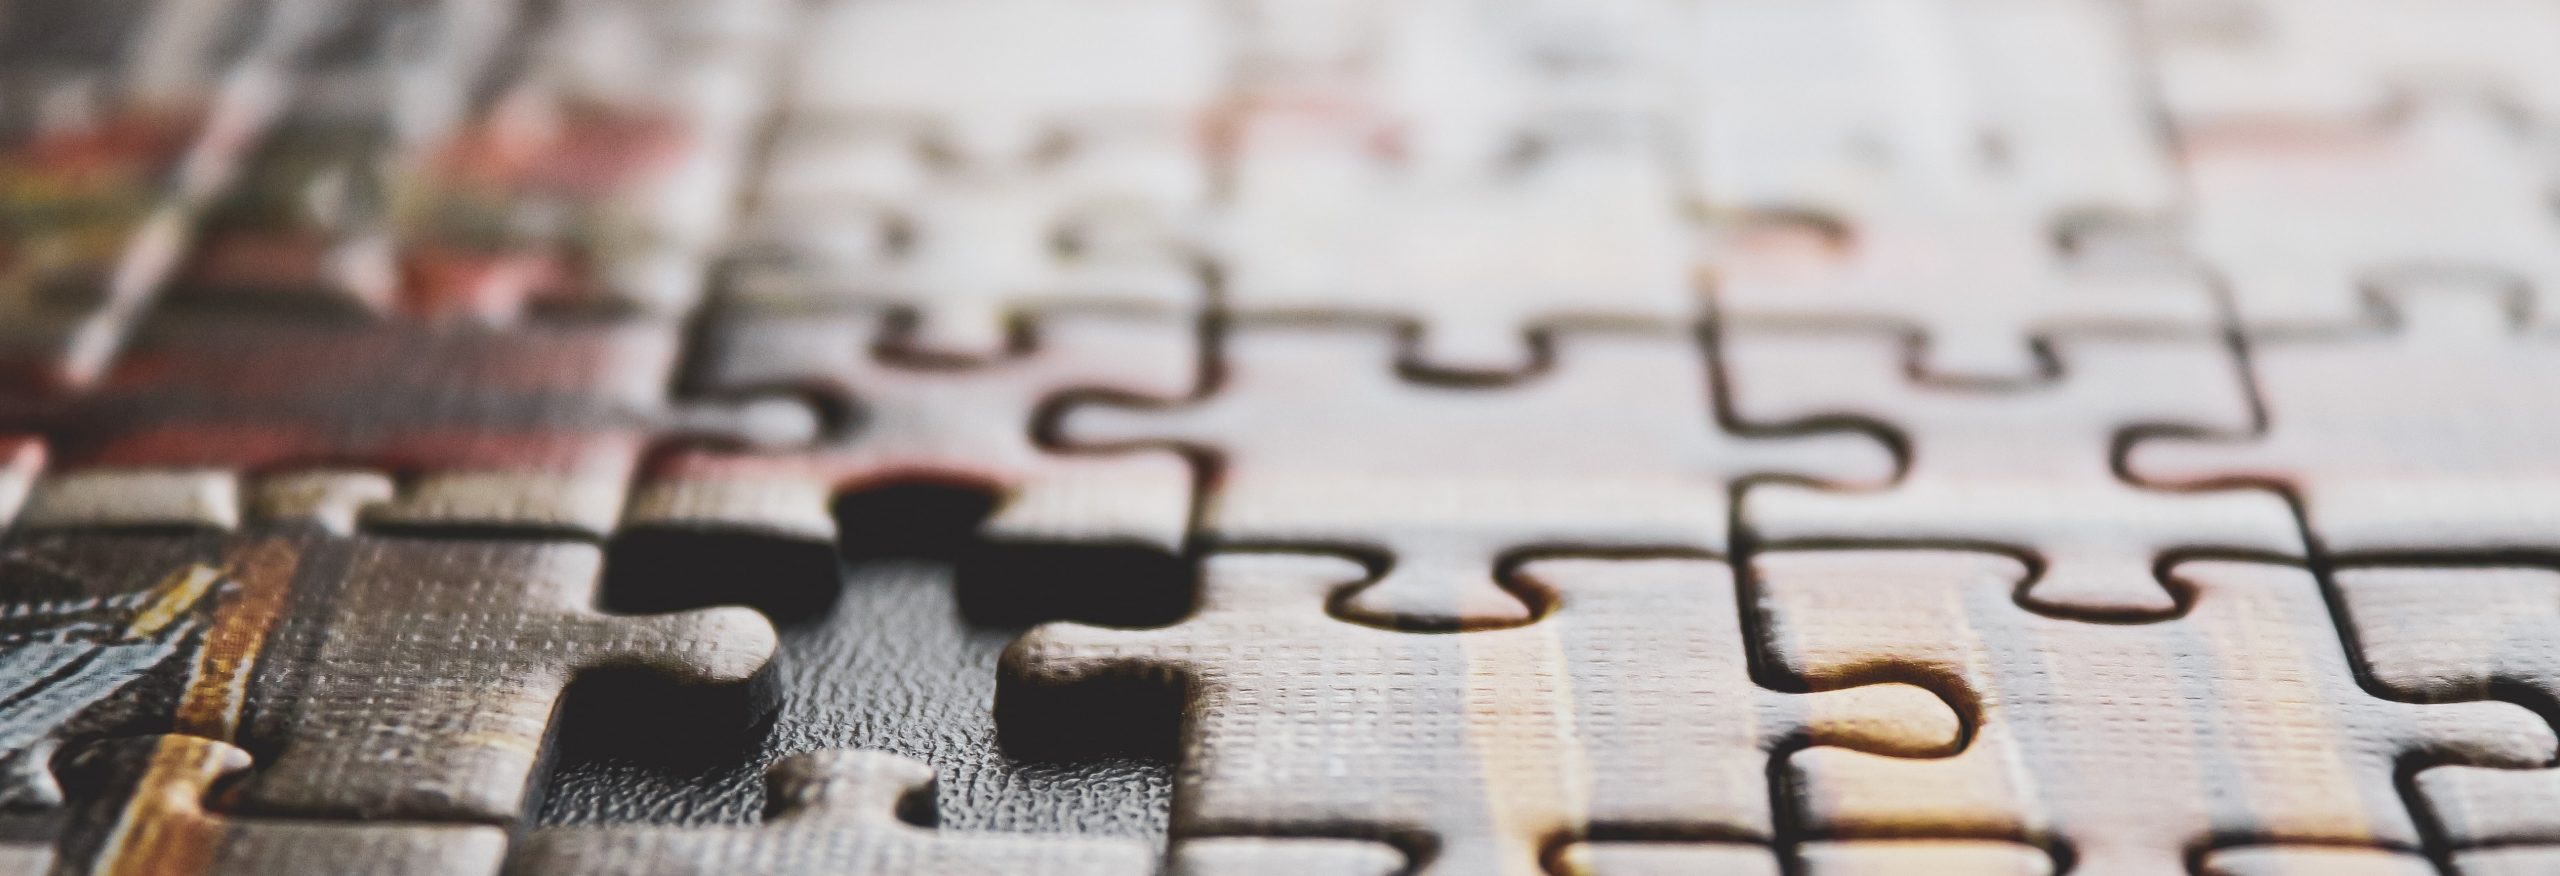 photo of a brown-toned puzzle with a missing piece